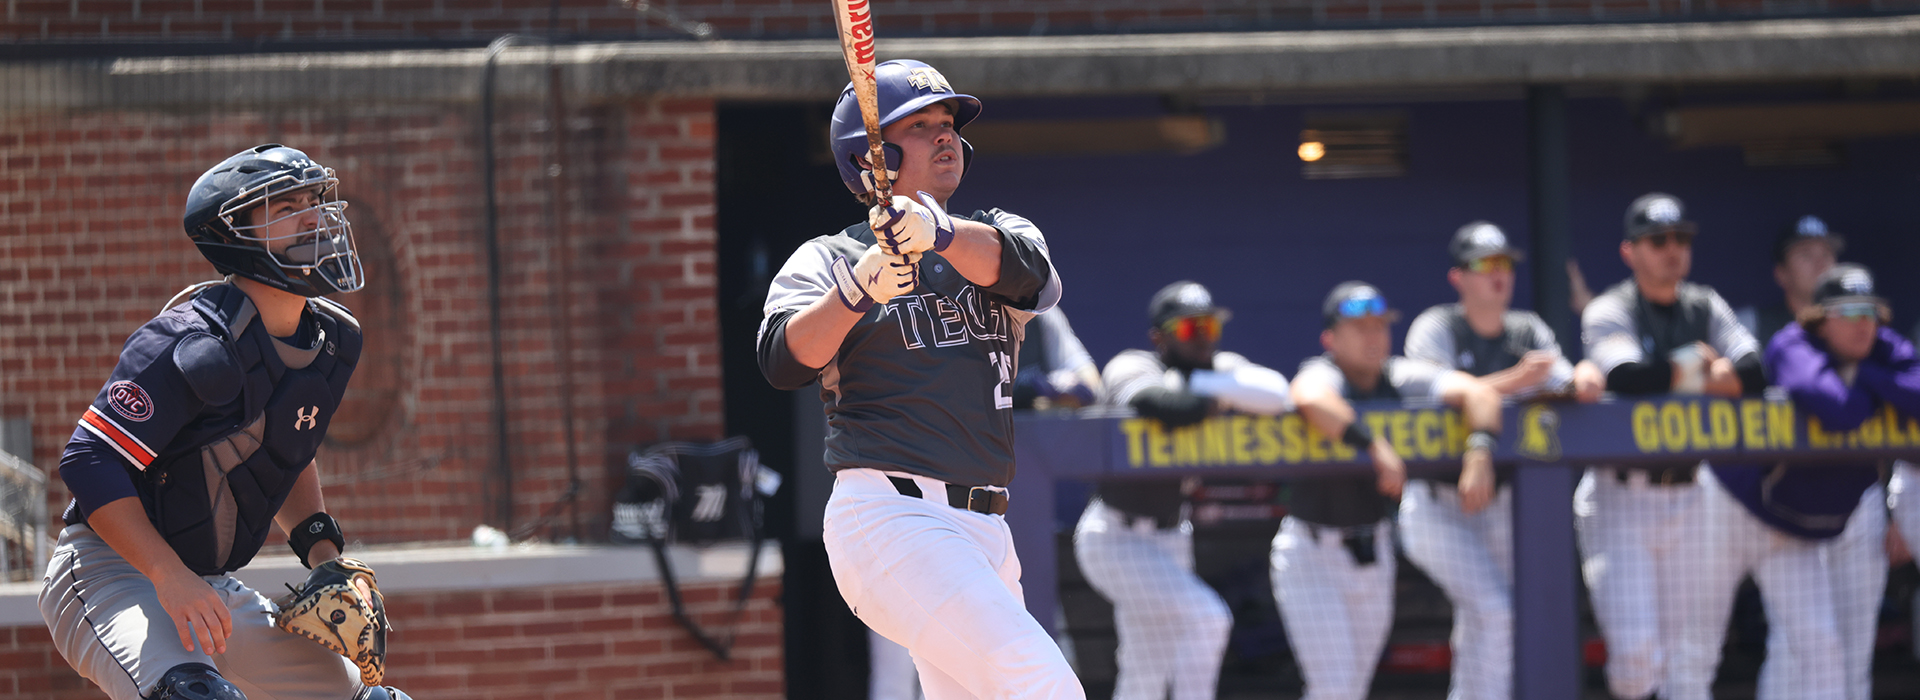 All-around excellence propels Tech past UT Martin for OVC series win